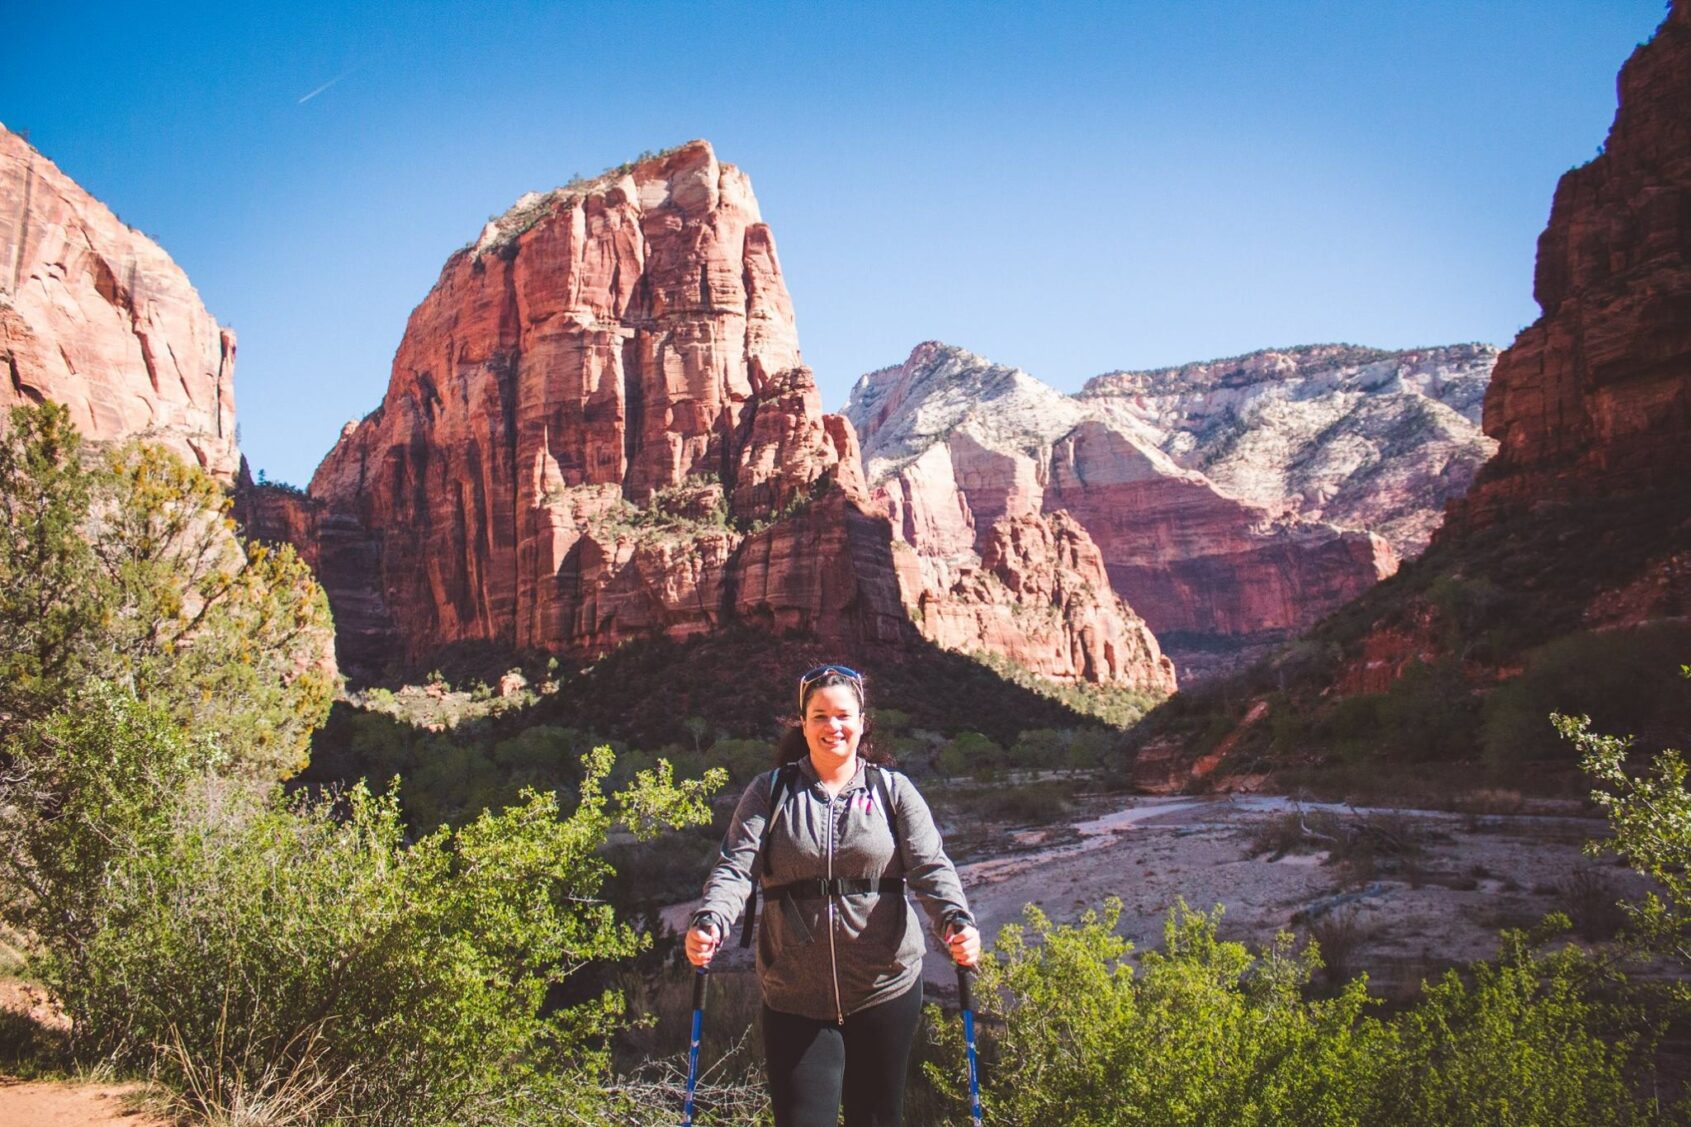 Zion National Park  When visiting a National Park site for the first time  many visitors have certain traditions they look forward to For some the  first one may be pulling the